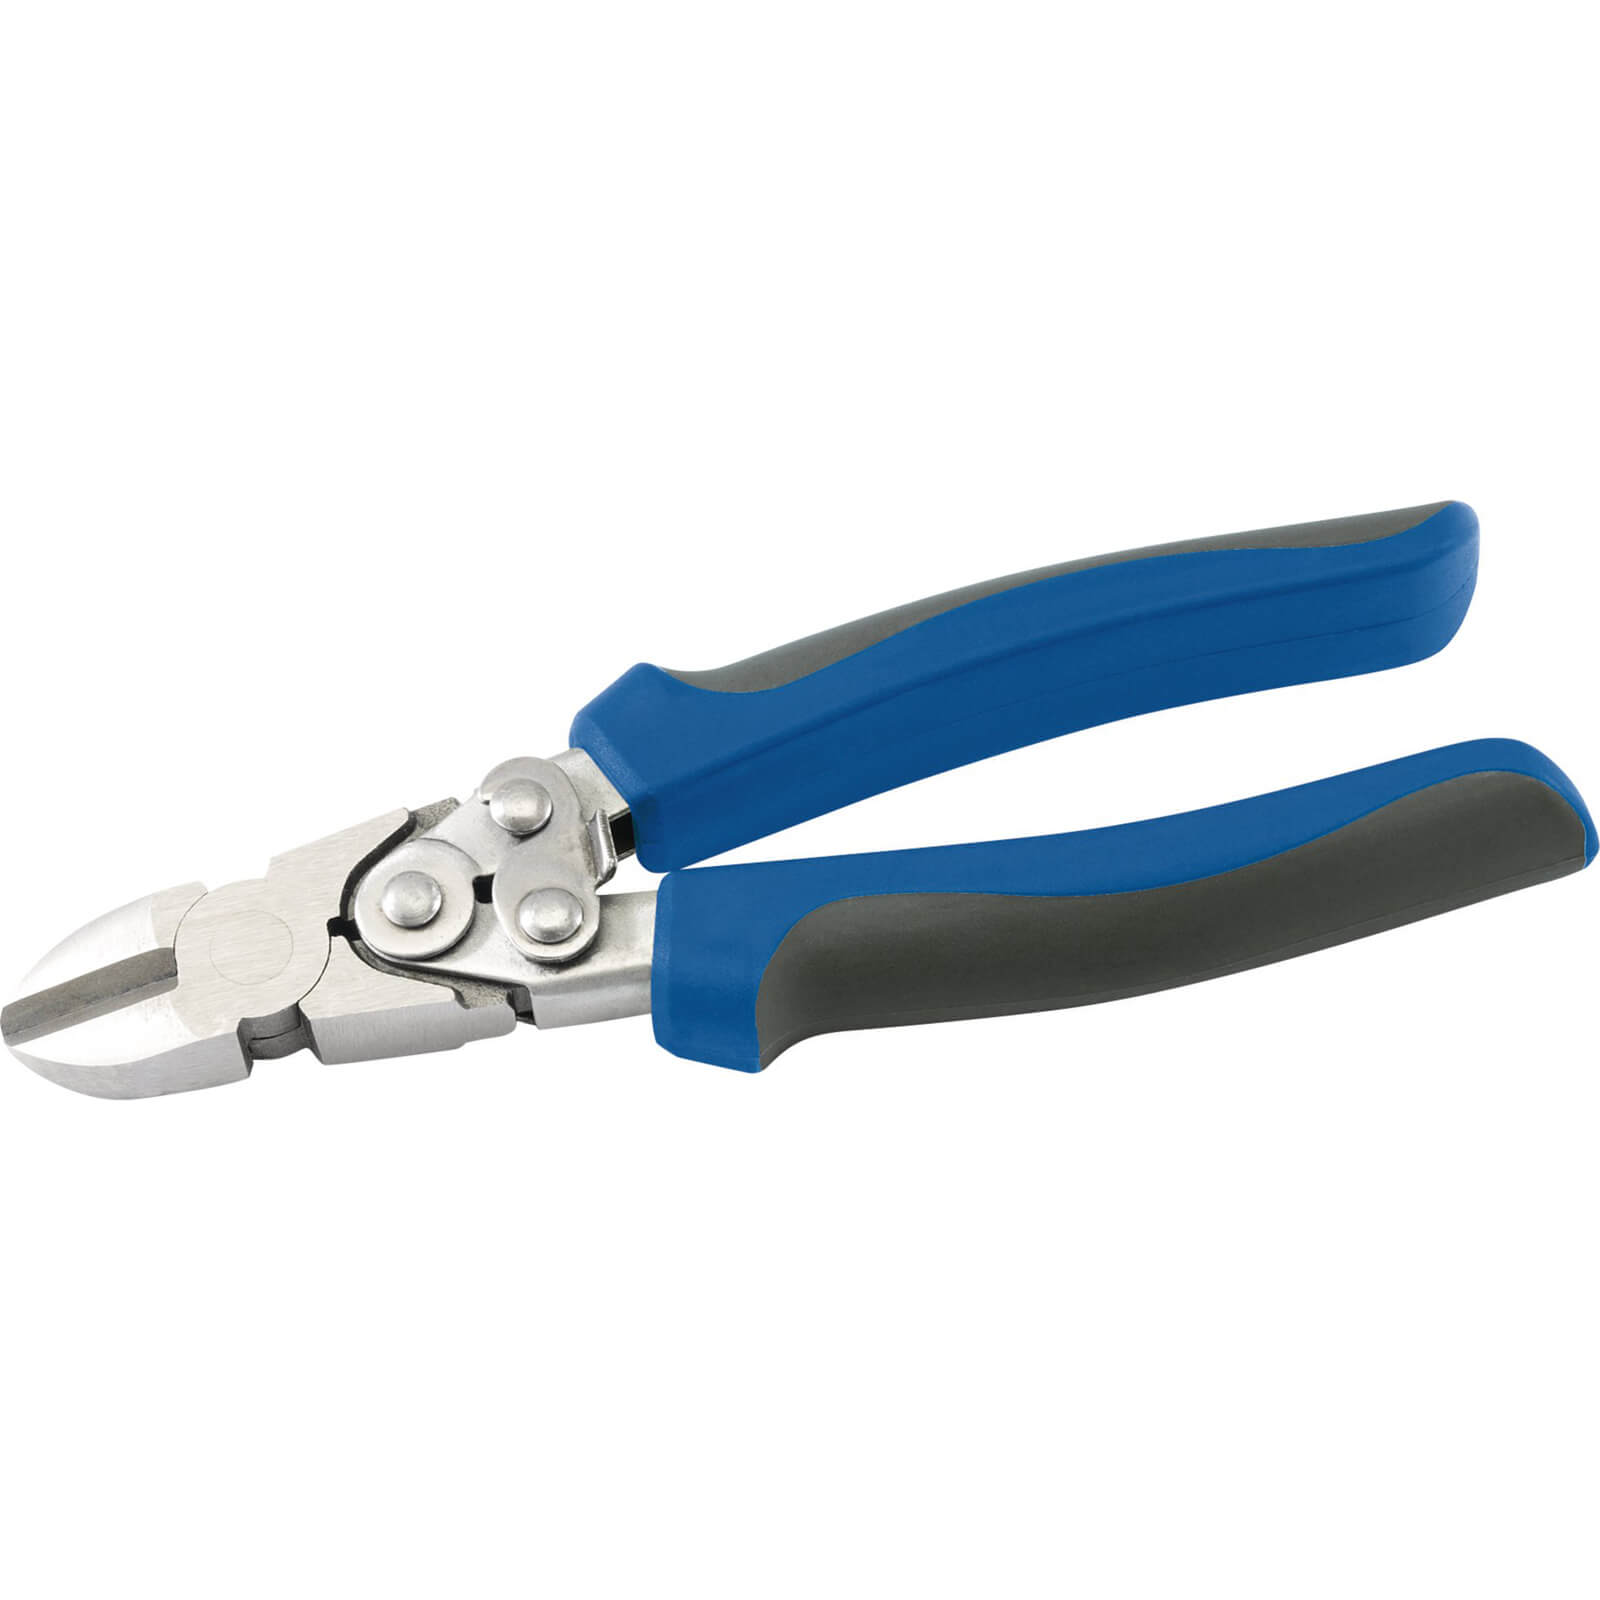 Photos - Utility Knife Draper Expert Compound Action Side Cutters 180mm 81425 